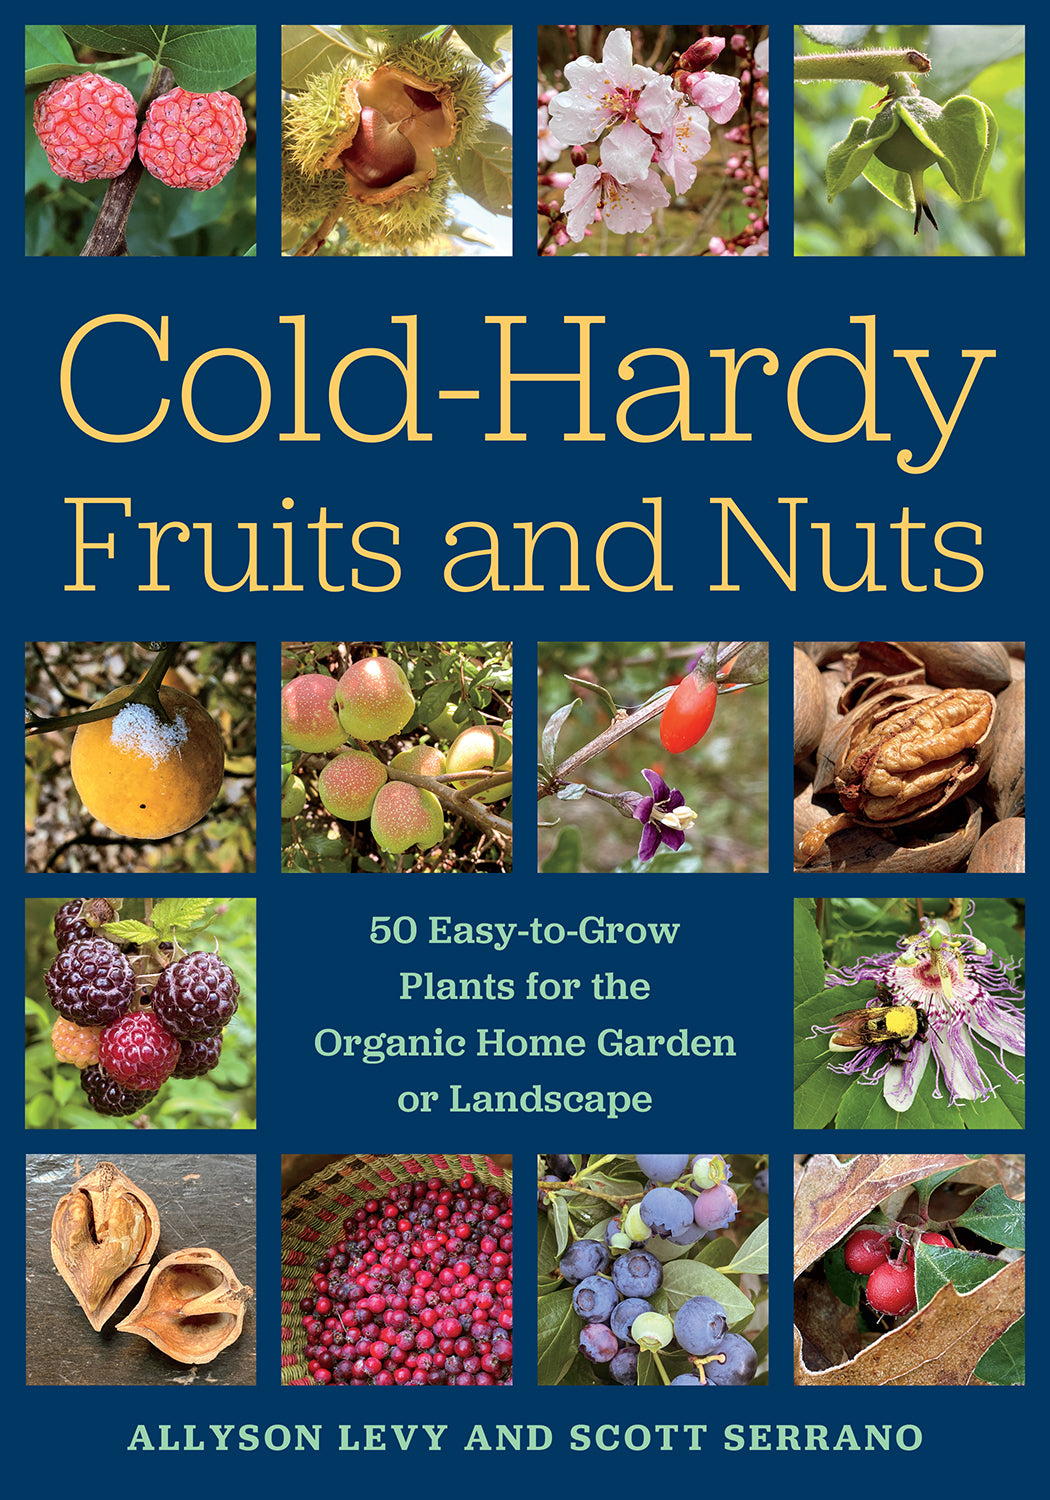 Cold-Hardy Fruits and Nuts 50 Easy-to-Grow Plants for the Organic Home Garden or Landscape by Scott Serrano & Allyson Levy